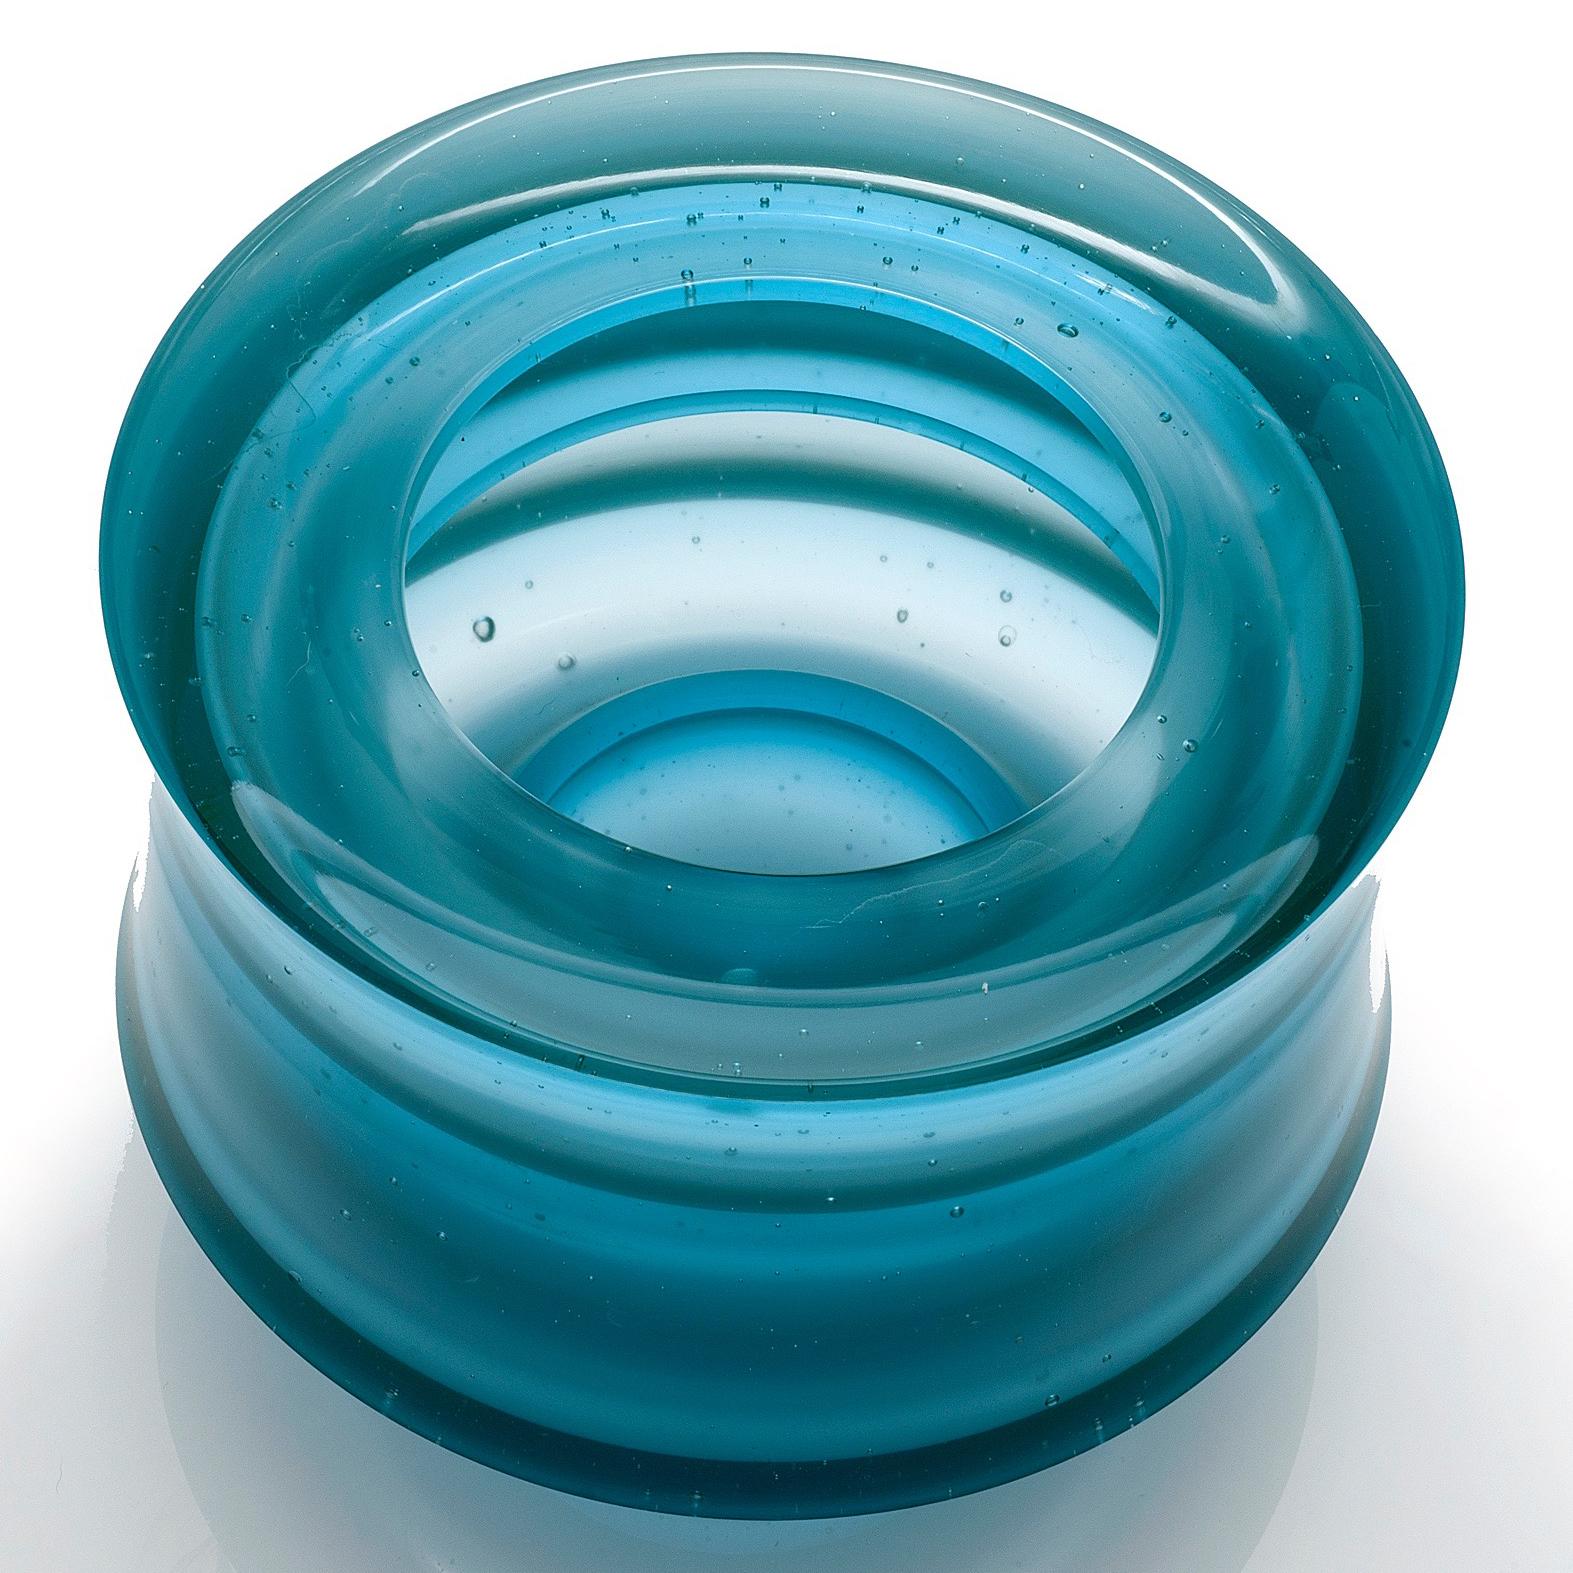 Corymb, a Unique Aqua/Turquoise Glass Art Work and Centrepiece by Paul Stopler 2